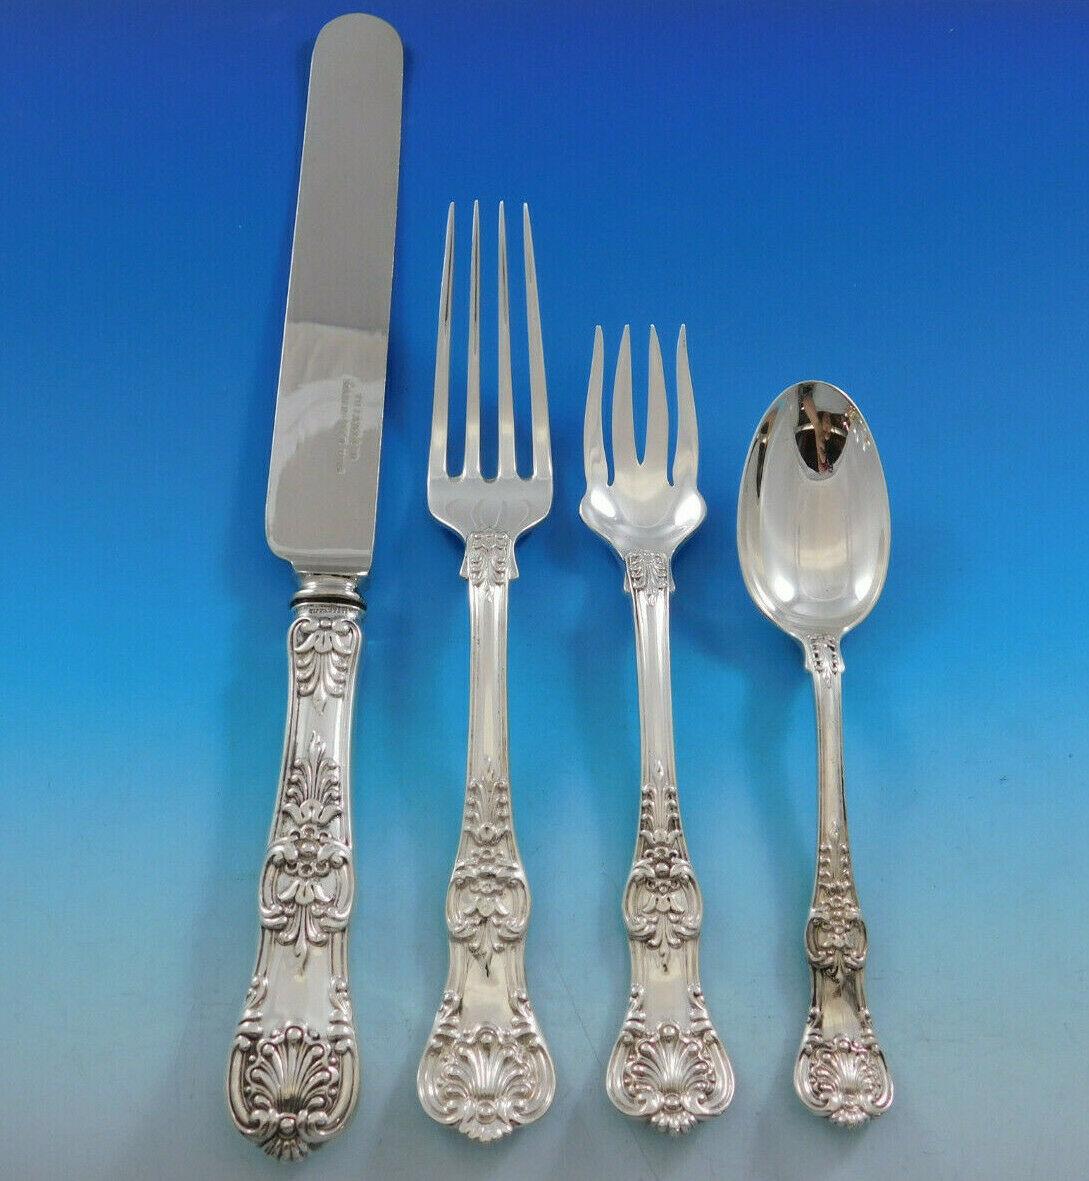 20th Century English King by Tiffany Sterling Silver Flatware Set for 8 Service 127 Pc Dinner